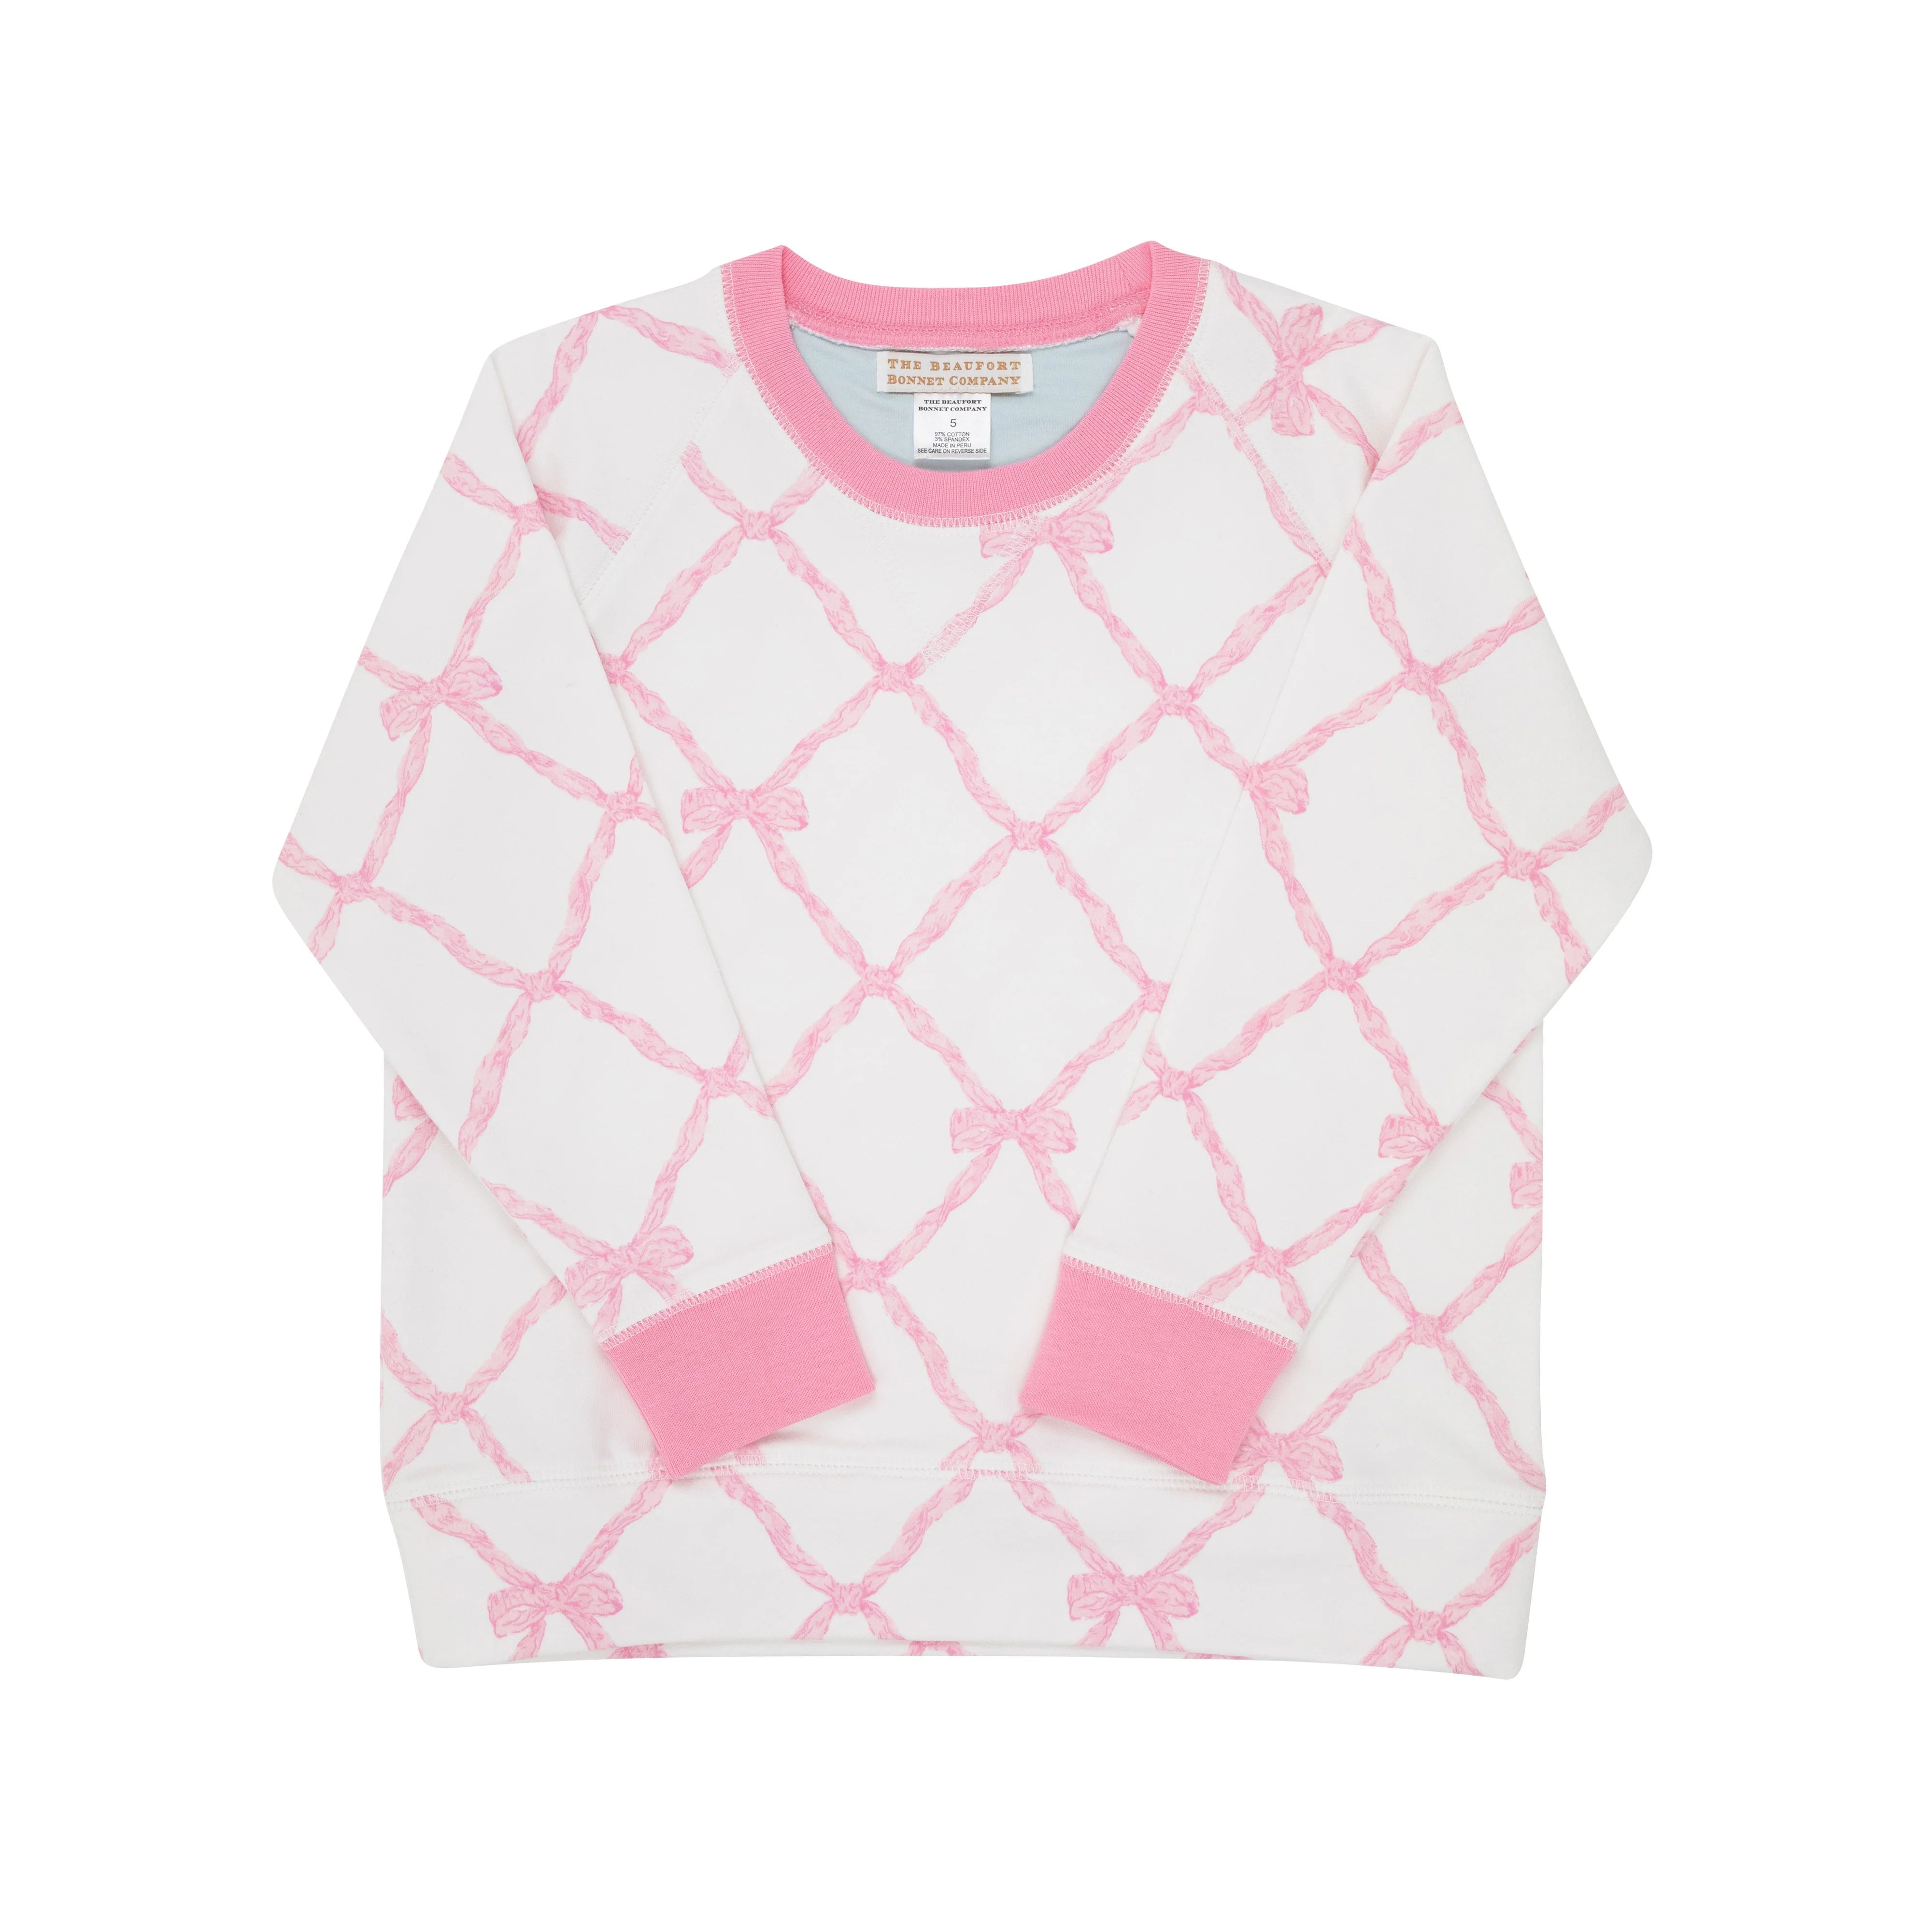 Cassidy Comfy Crewneck - Belle Meade Bow with Hamptons Hot Pink | The Beaufort Bonnet Company